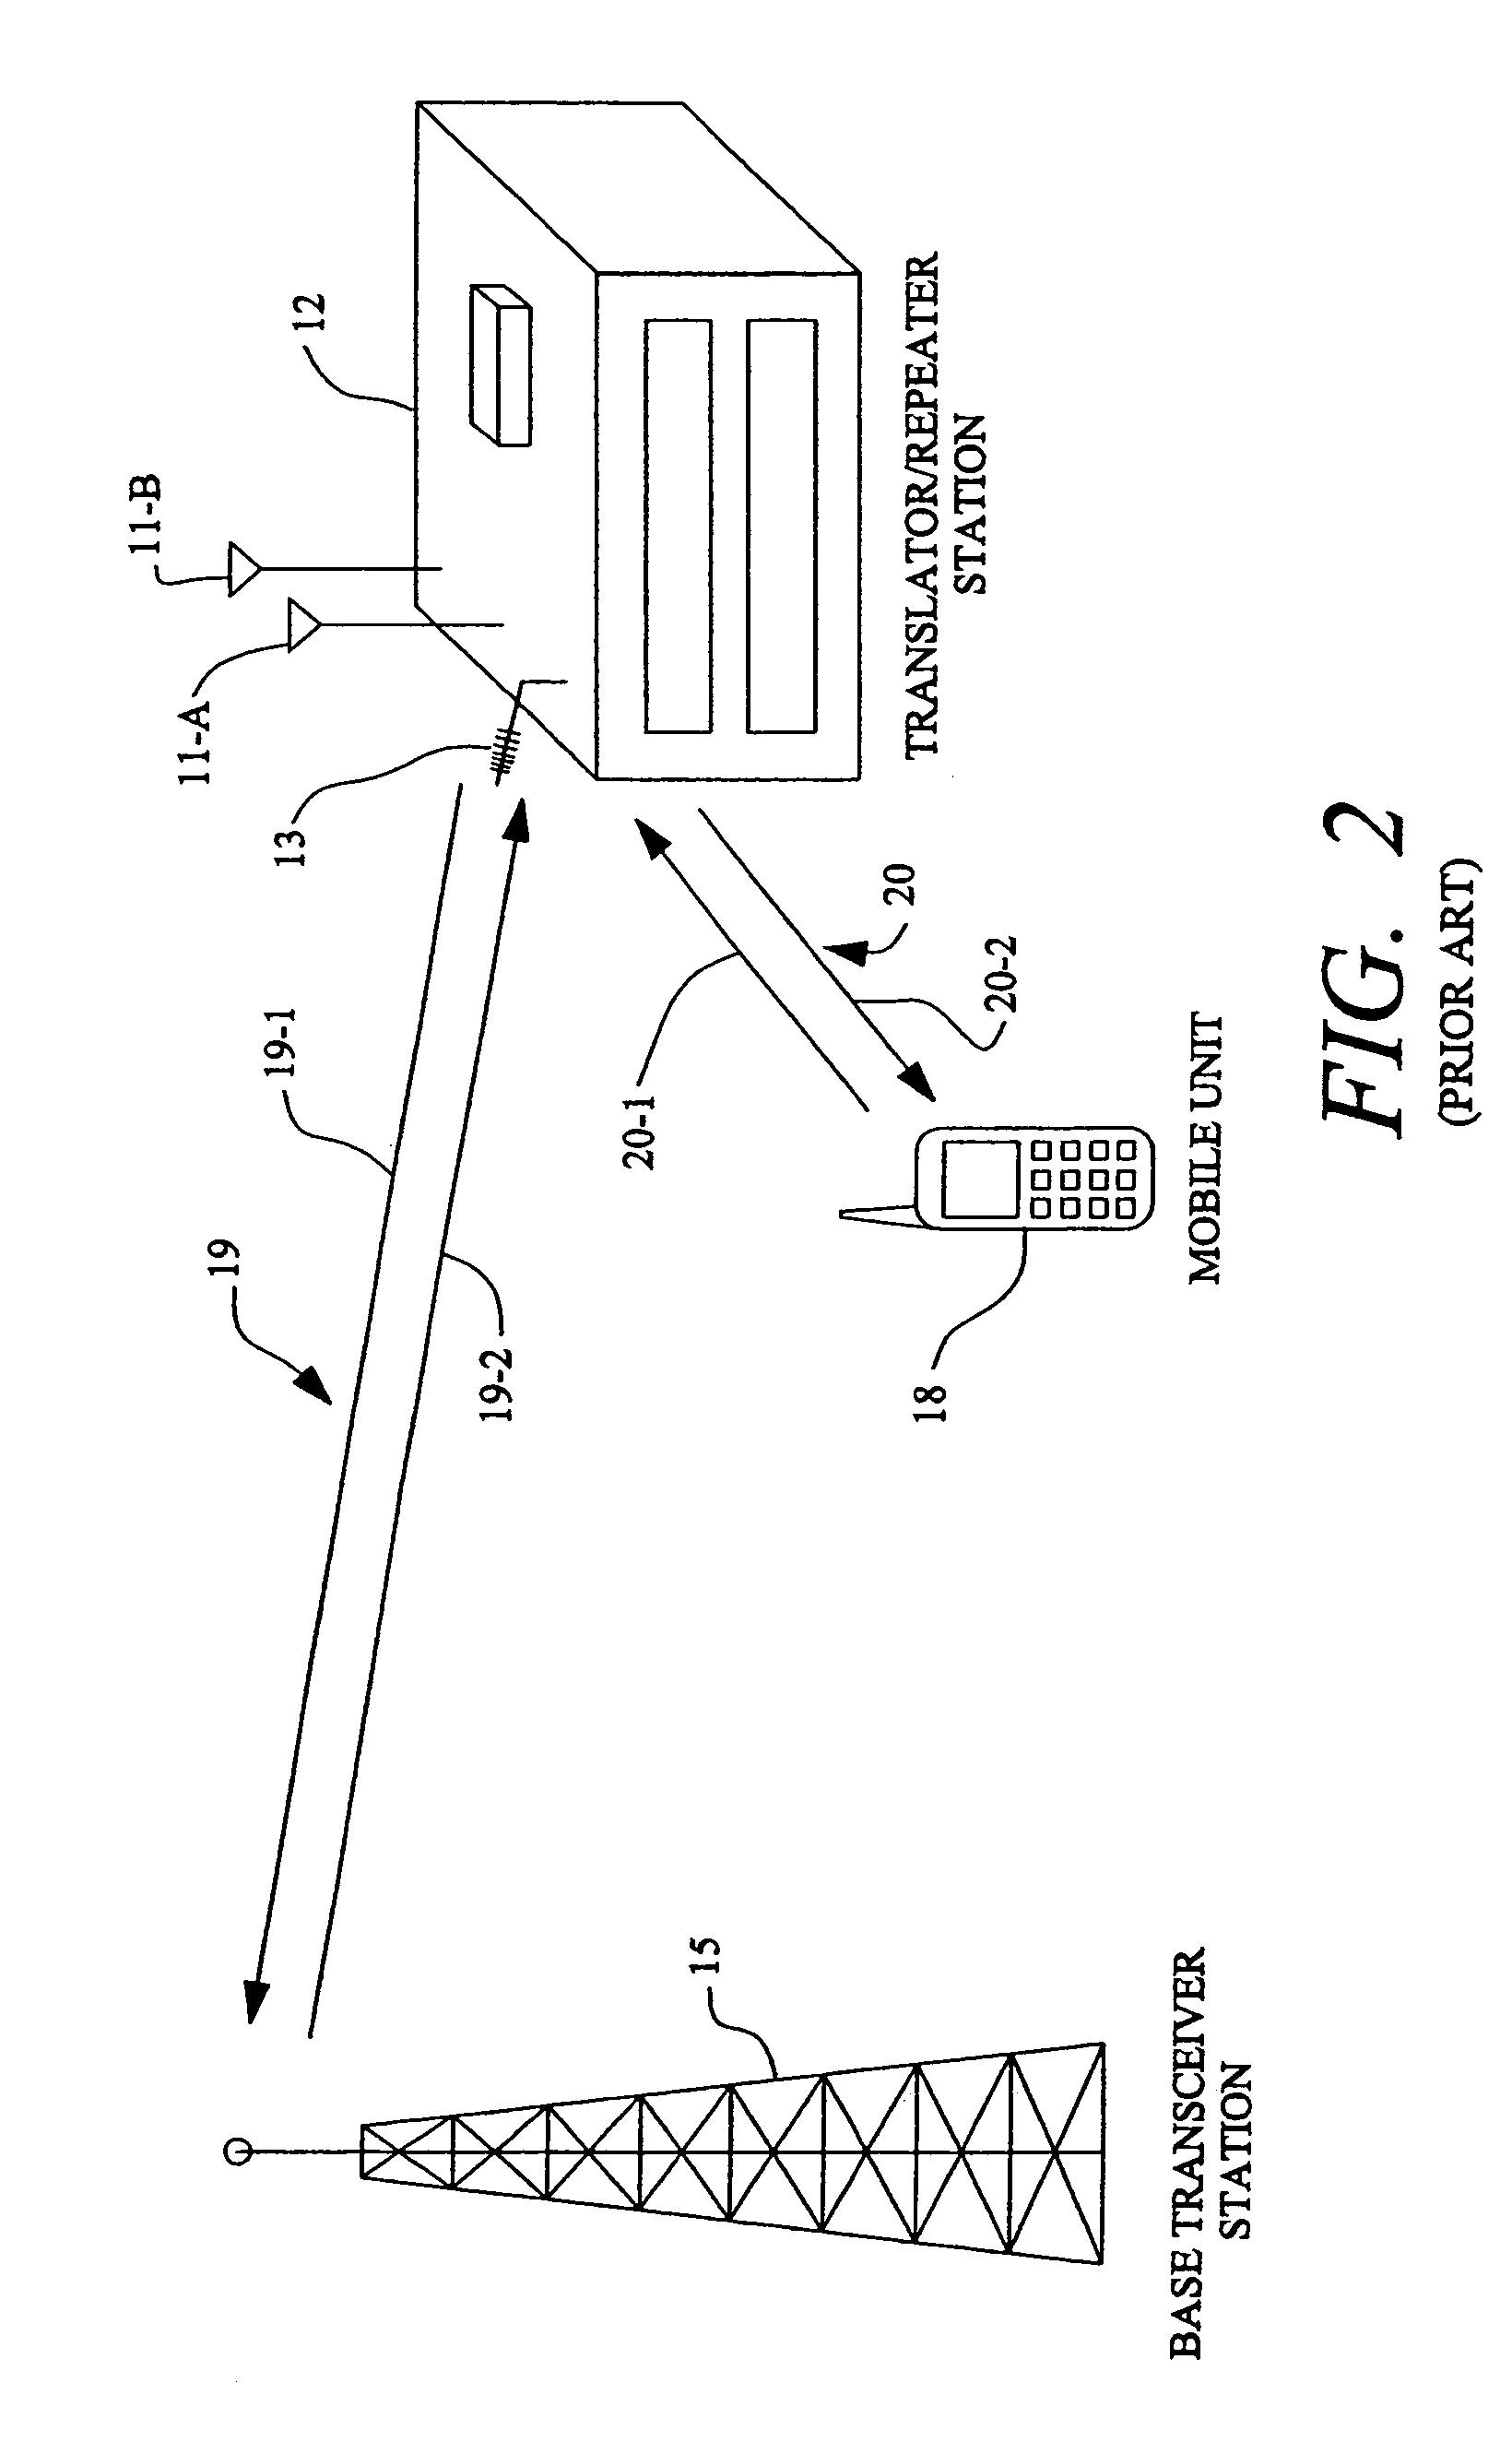 Packet based backhaul channel configuration for a wireless repeater